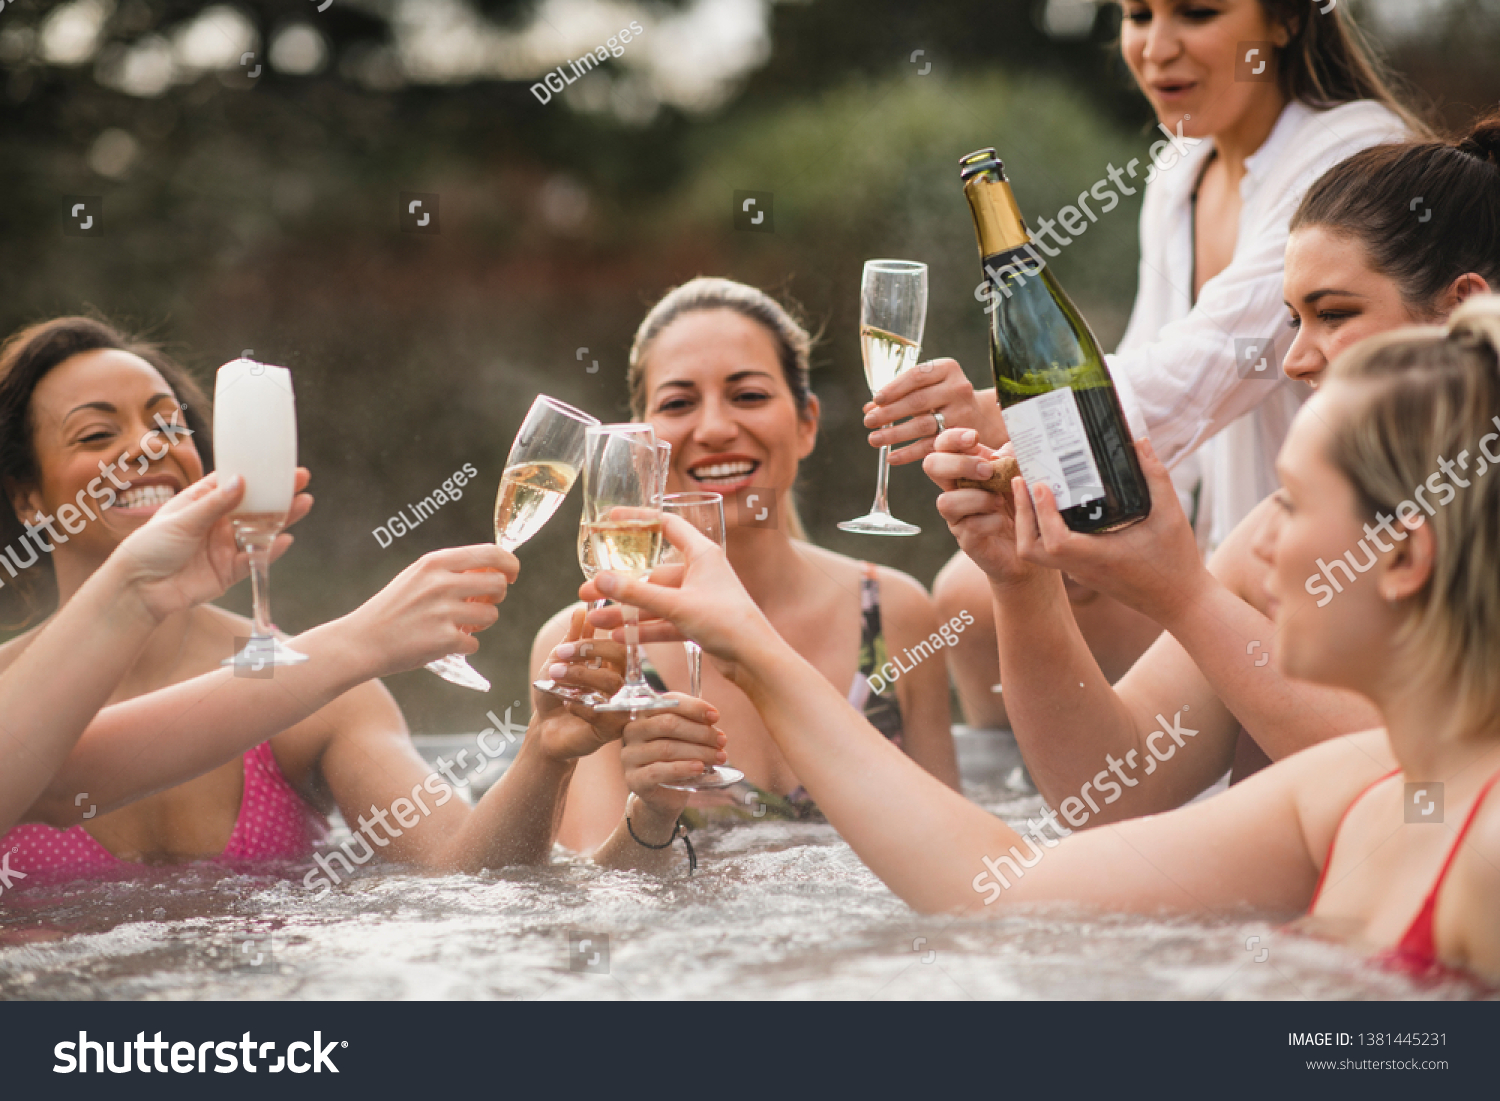 Small group of female friends socialising and relaxing in the hot tub on a weekend away. They are celebrating with a glass of champagne. #1381445231